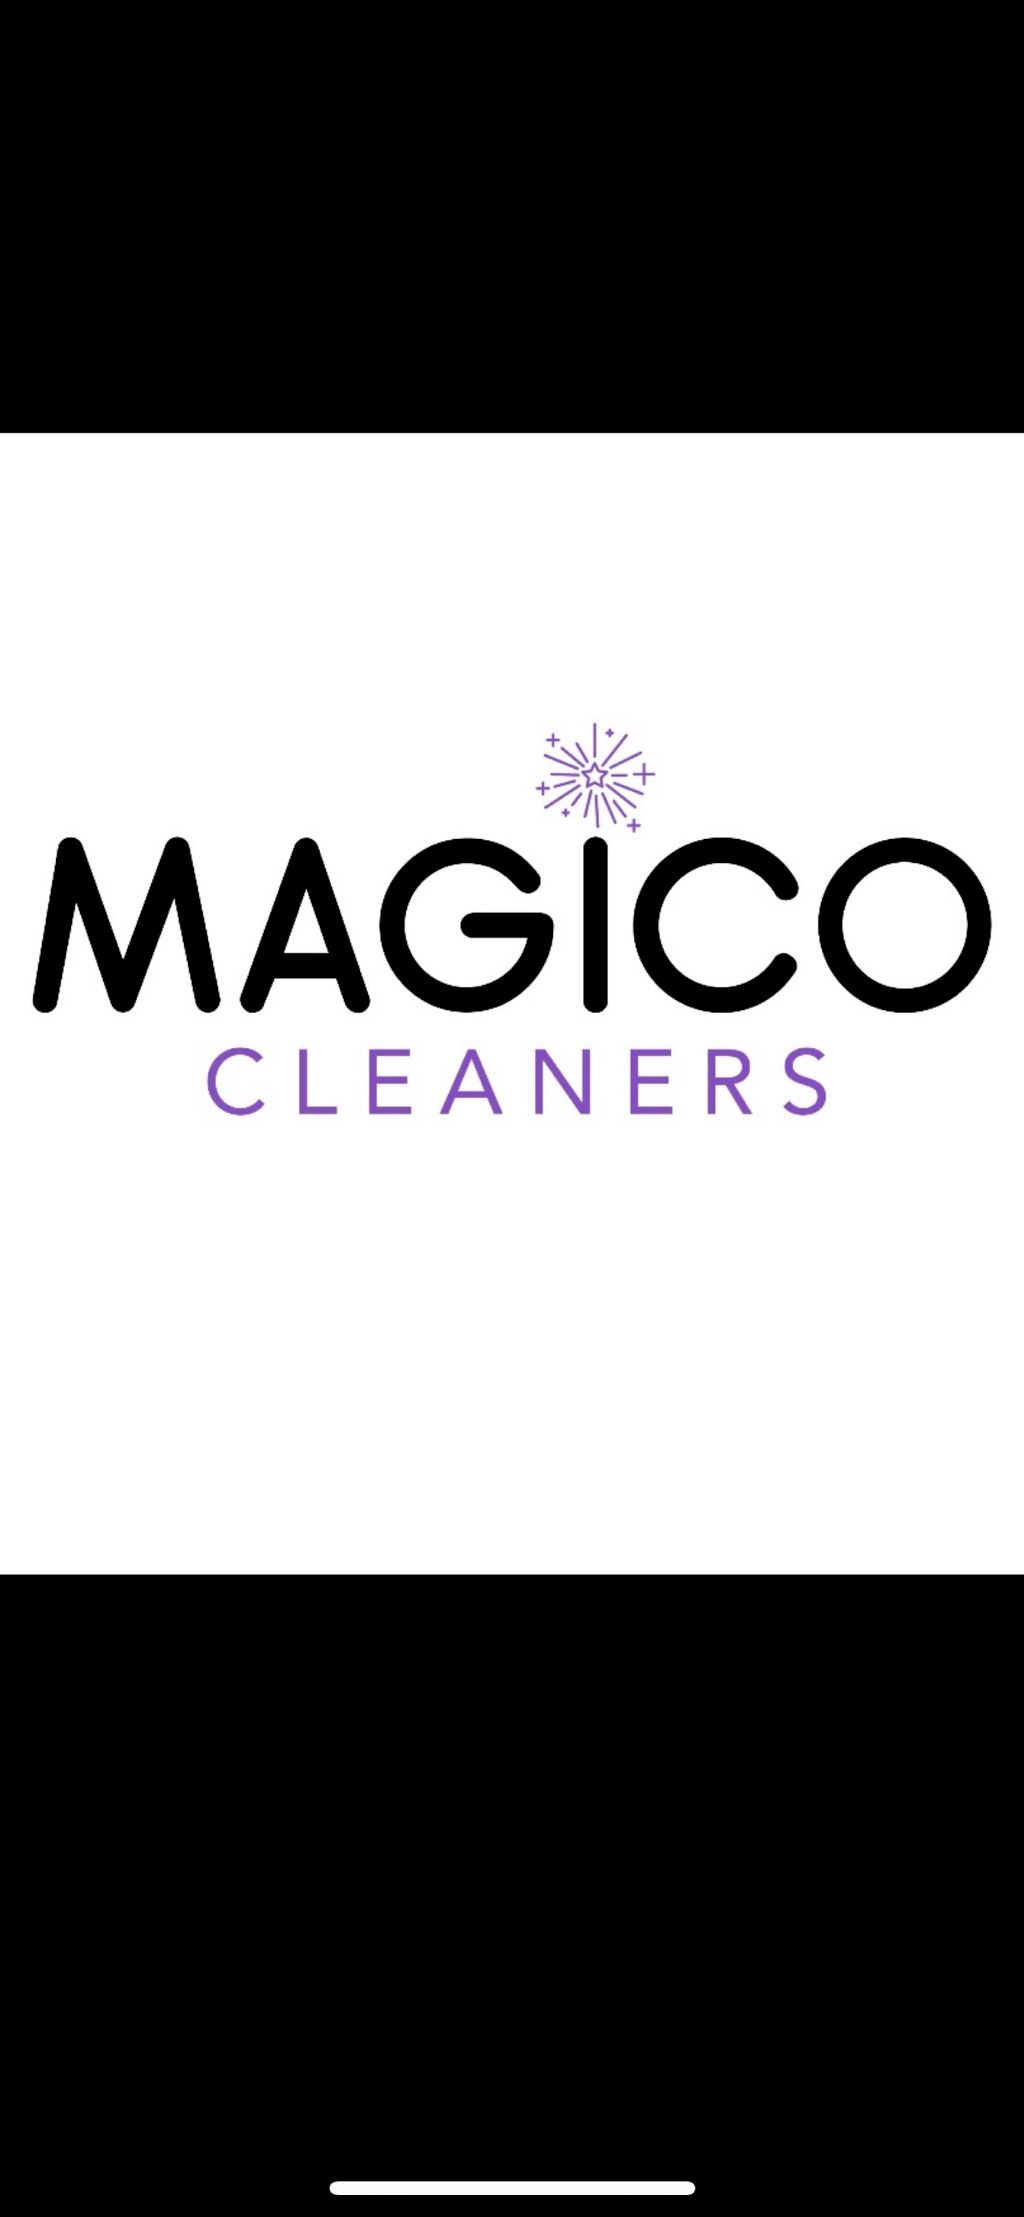 Magico Cleaners